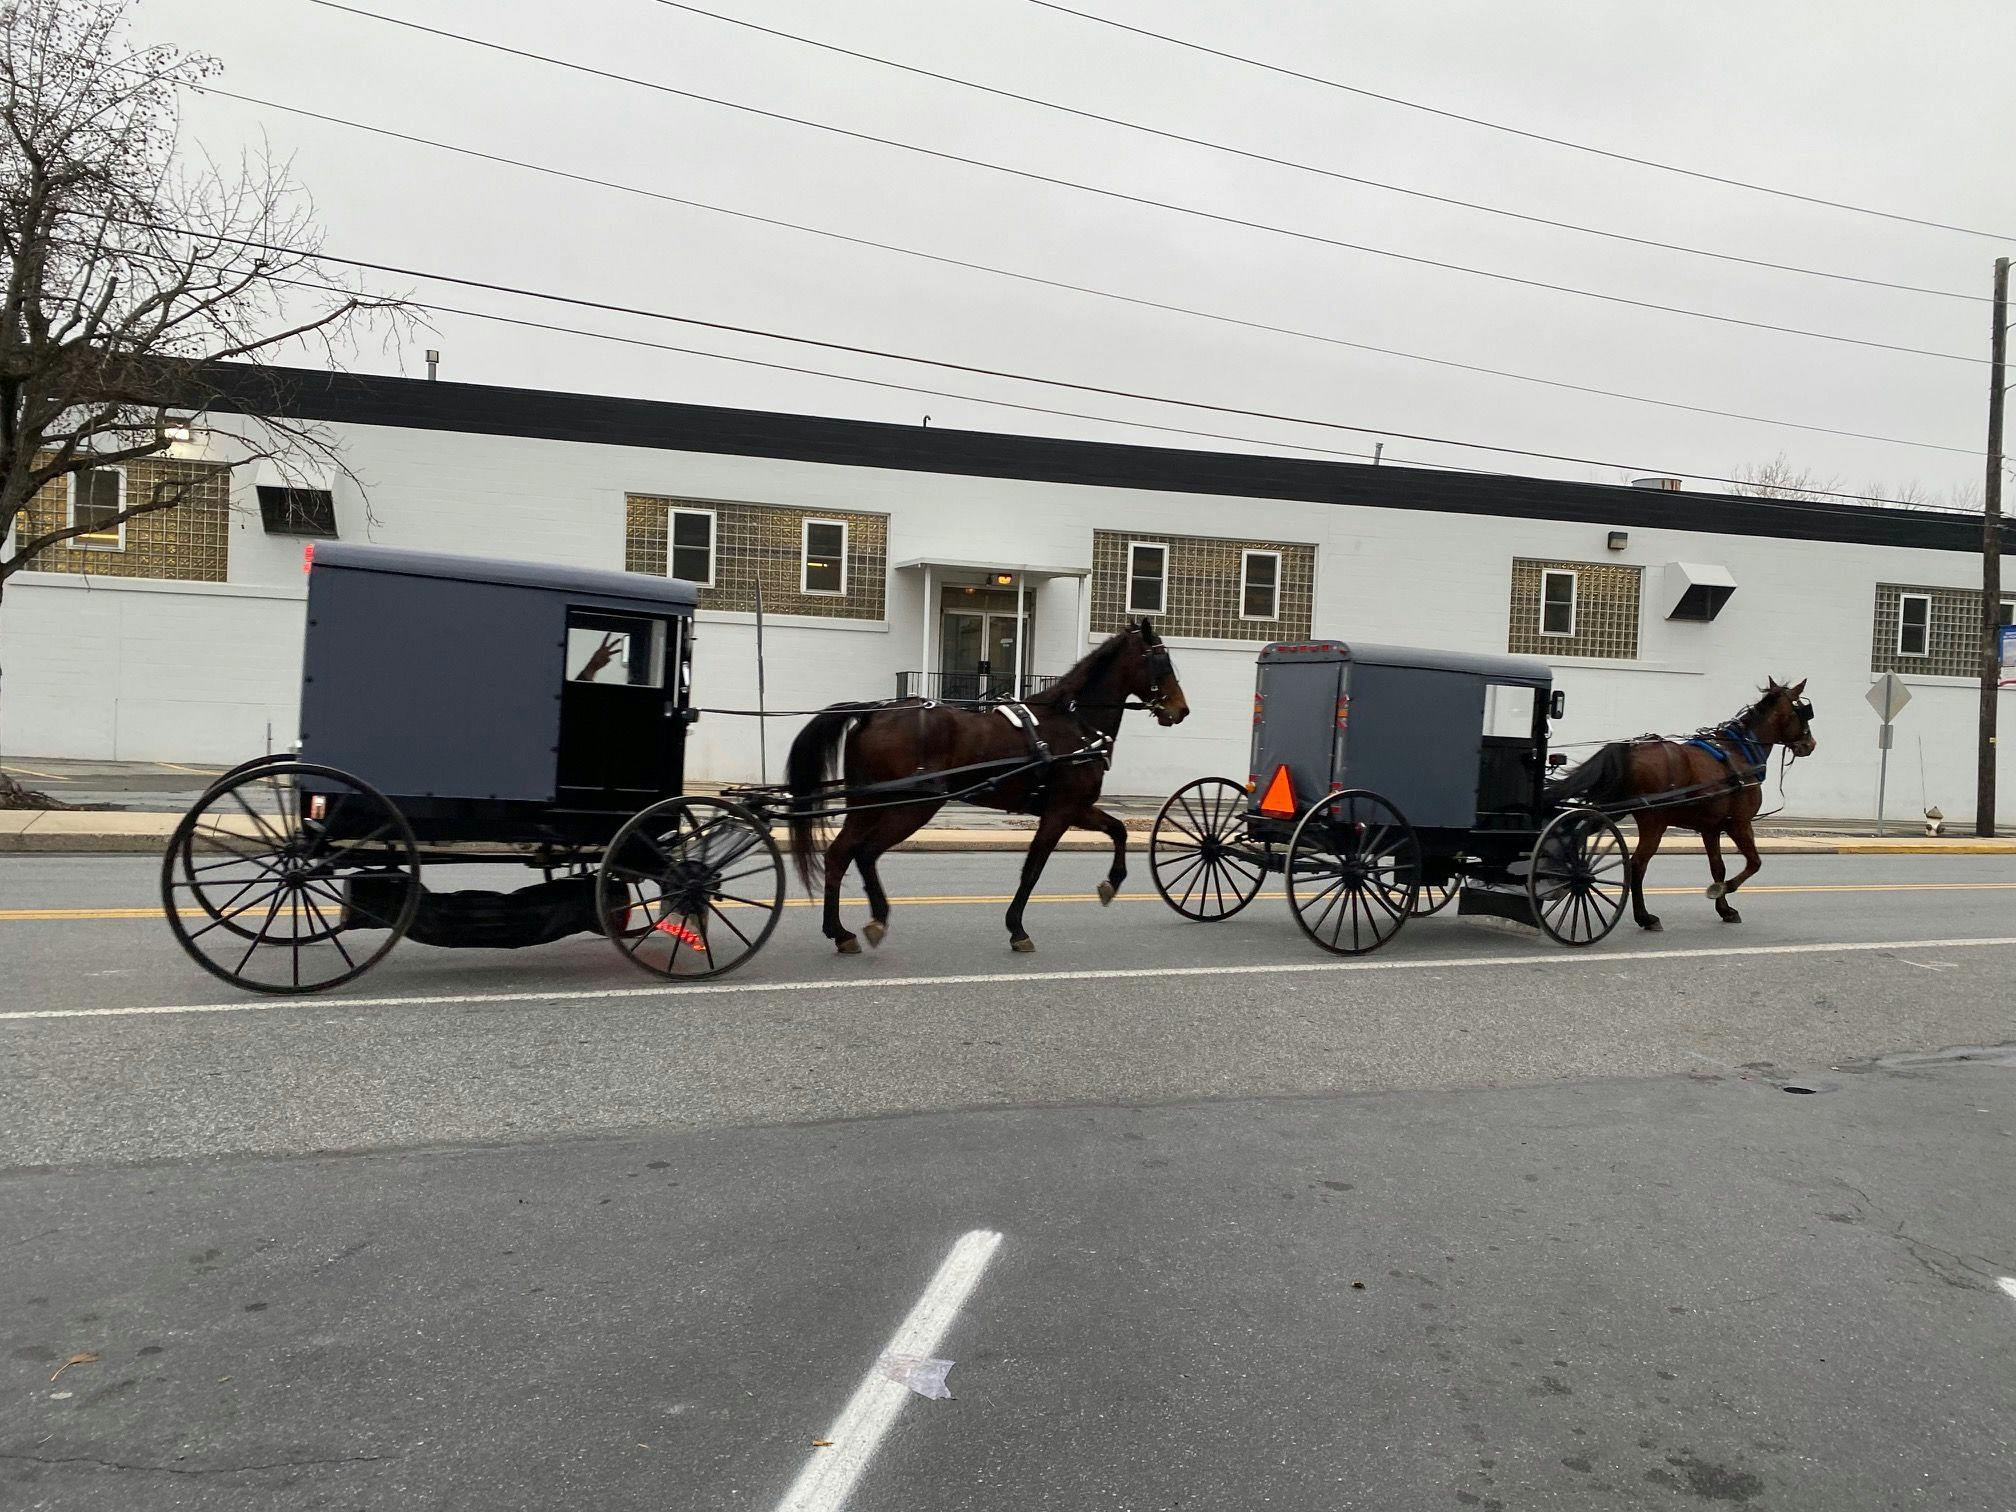 Two Amish buggies move down a road in Lancaster County, Pennsylvania. The Keystone State is home to more than 80,000 Amish, and WellSpan Health is aiming to improve health in Plain communities. (Photo: Ron Southwick)